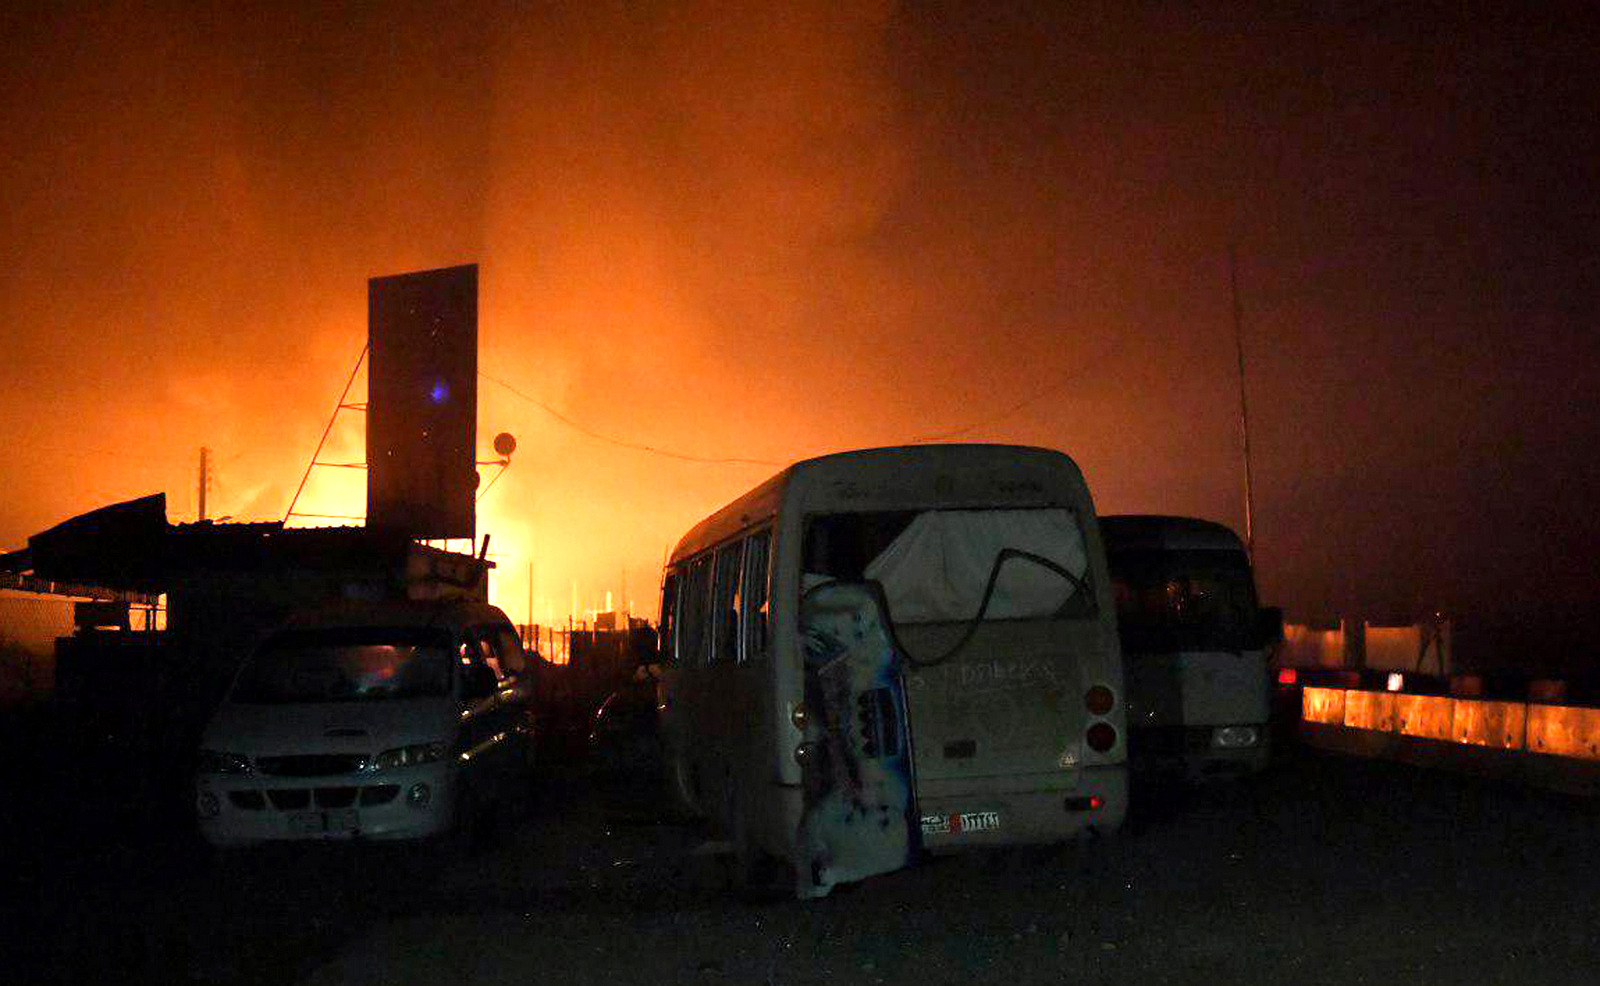 Flames rise from buses and trucks in a convoy headed to Afrin, Syria. According to Syrian state TV, a convoy carrying aid heading toward Afrin was targeted by Turkish artillery, in al-Ziara village. The incident, came two days after pro-government fighters began entering the predominantly Kurdish town to shore up the Kurdish forces, Feb. 23, 2018. (SANA via AP)